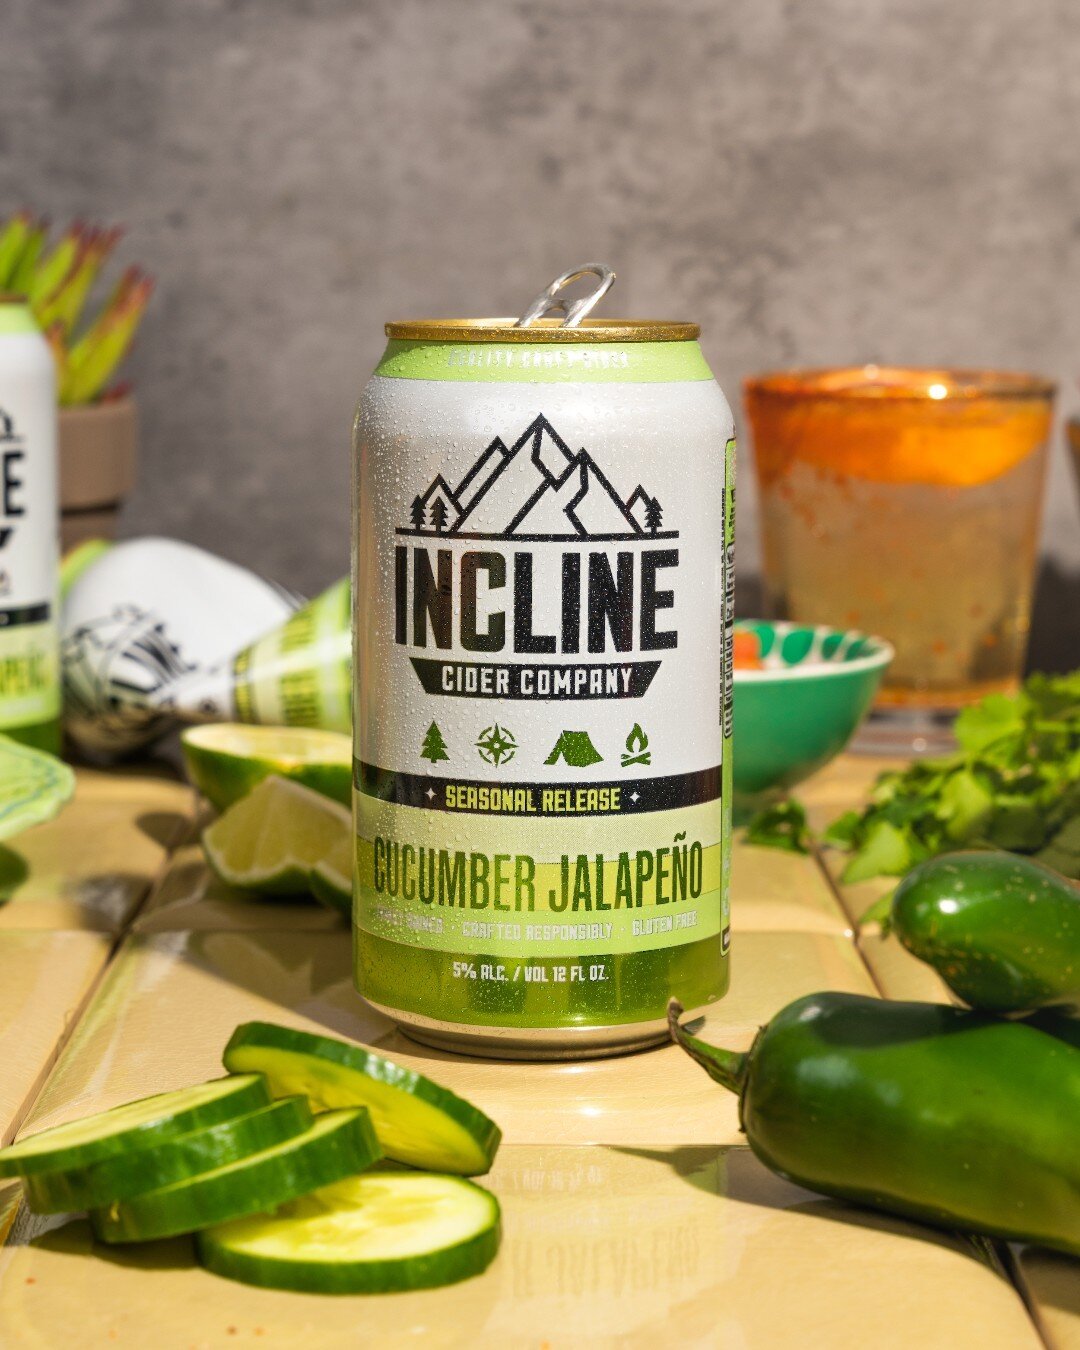 It has this whole &quot;fiesta forever&quot; vibe we can't get enough of ☀️

The perfect balance of refreshing cucumber + jalape&ntilde;o spice, and it's a little something different.  Here for the season! #summerseasonal